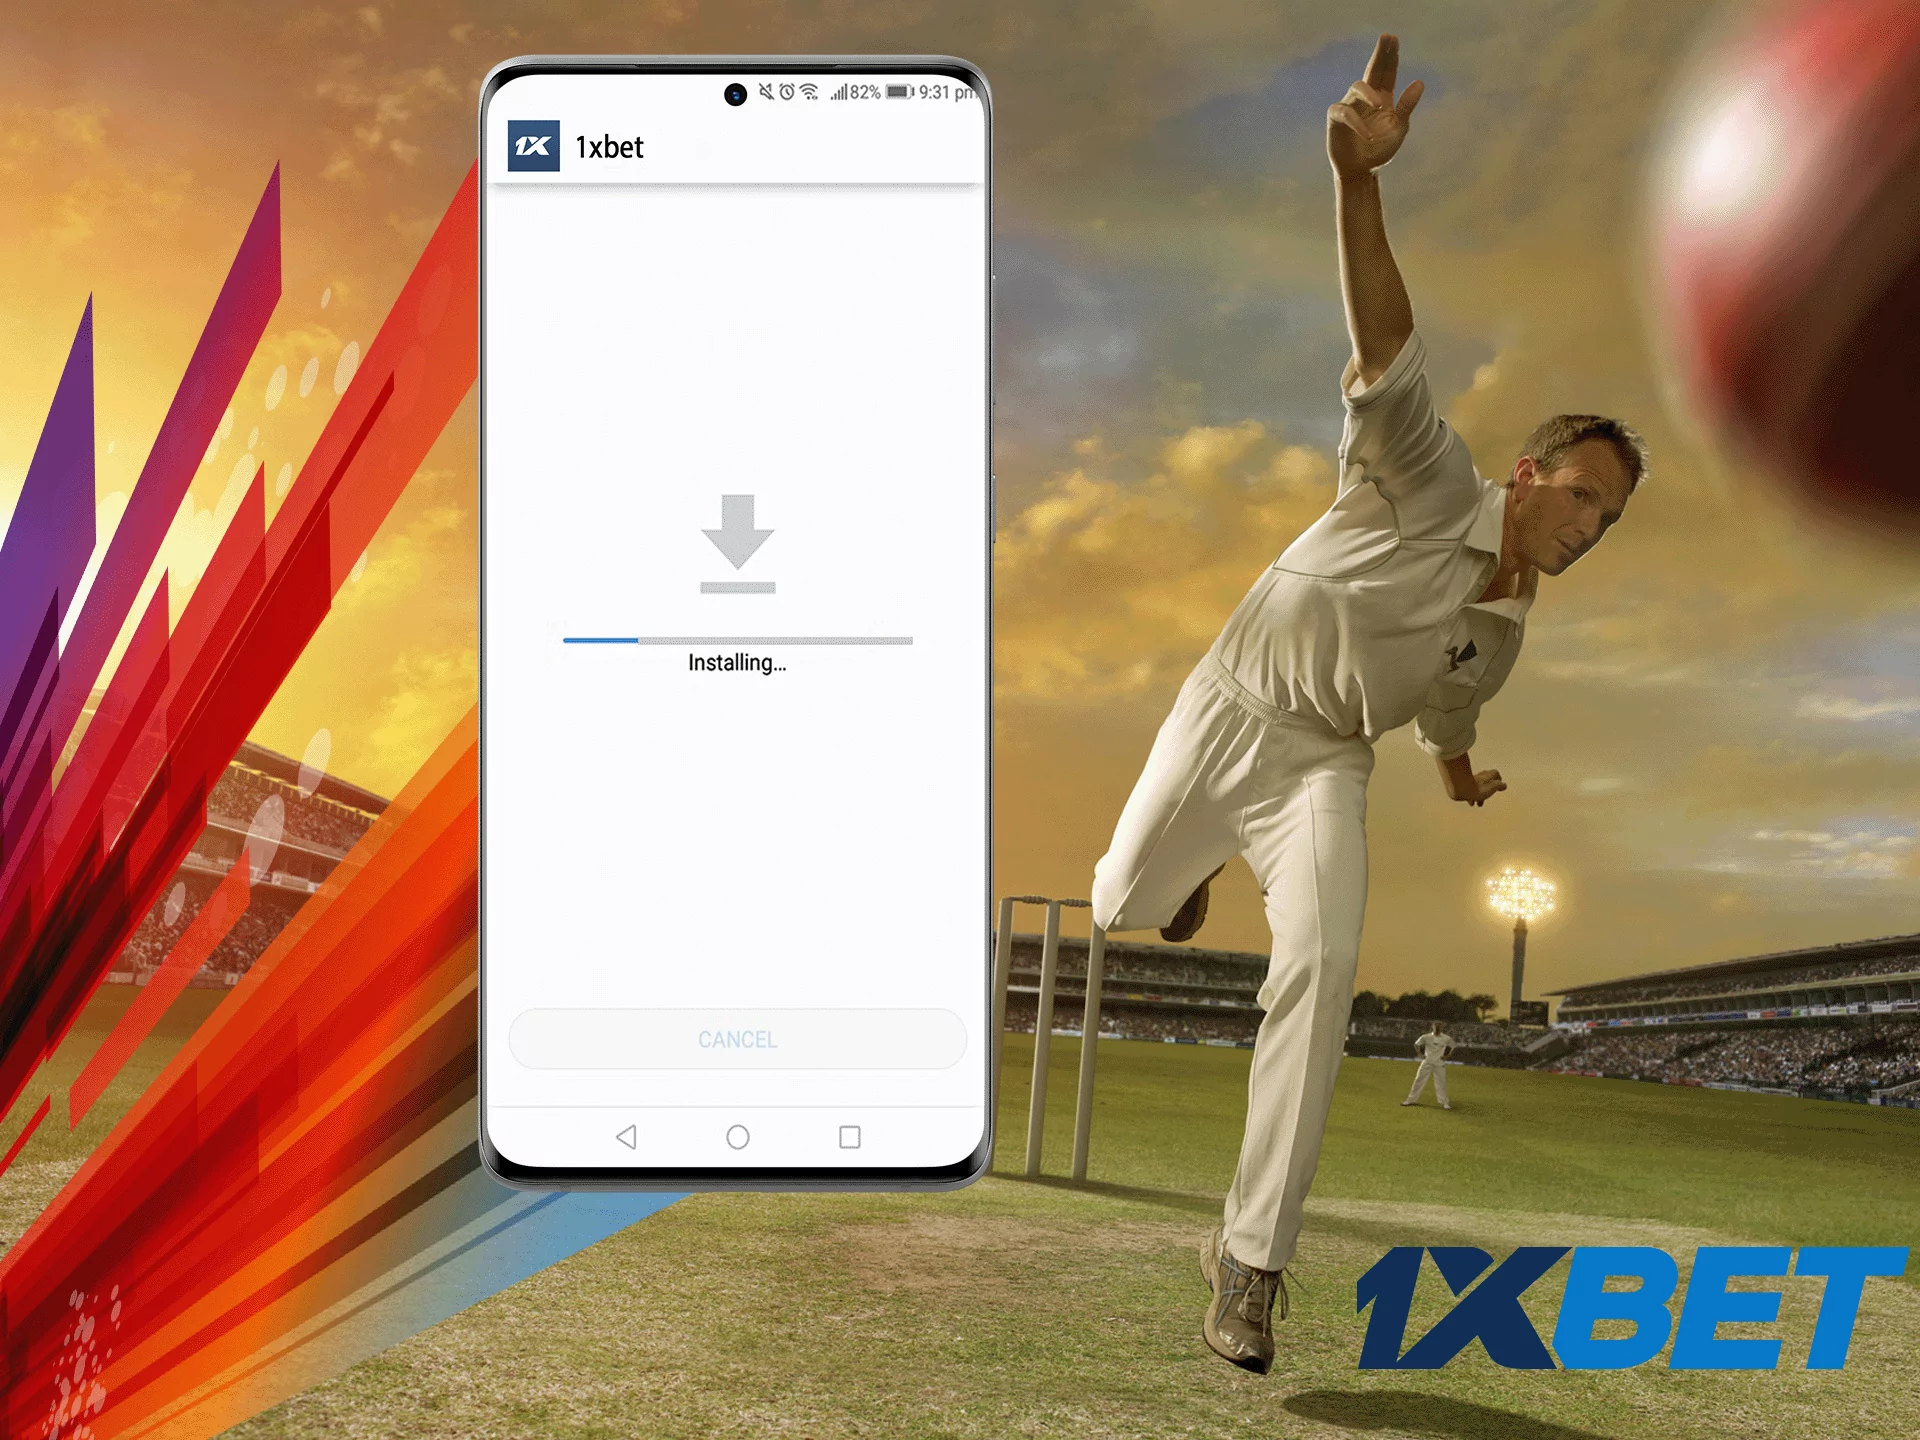 Installing the 1xbet application is a simple and quick step.